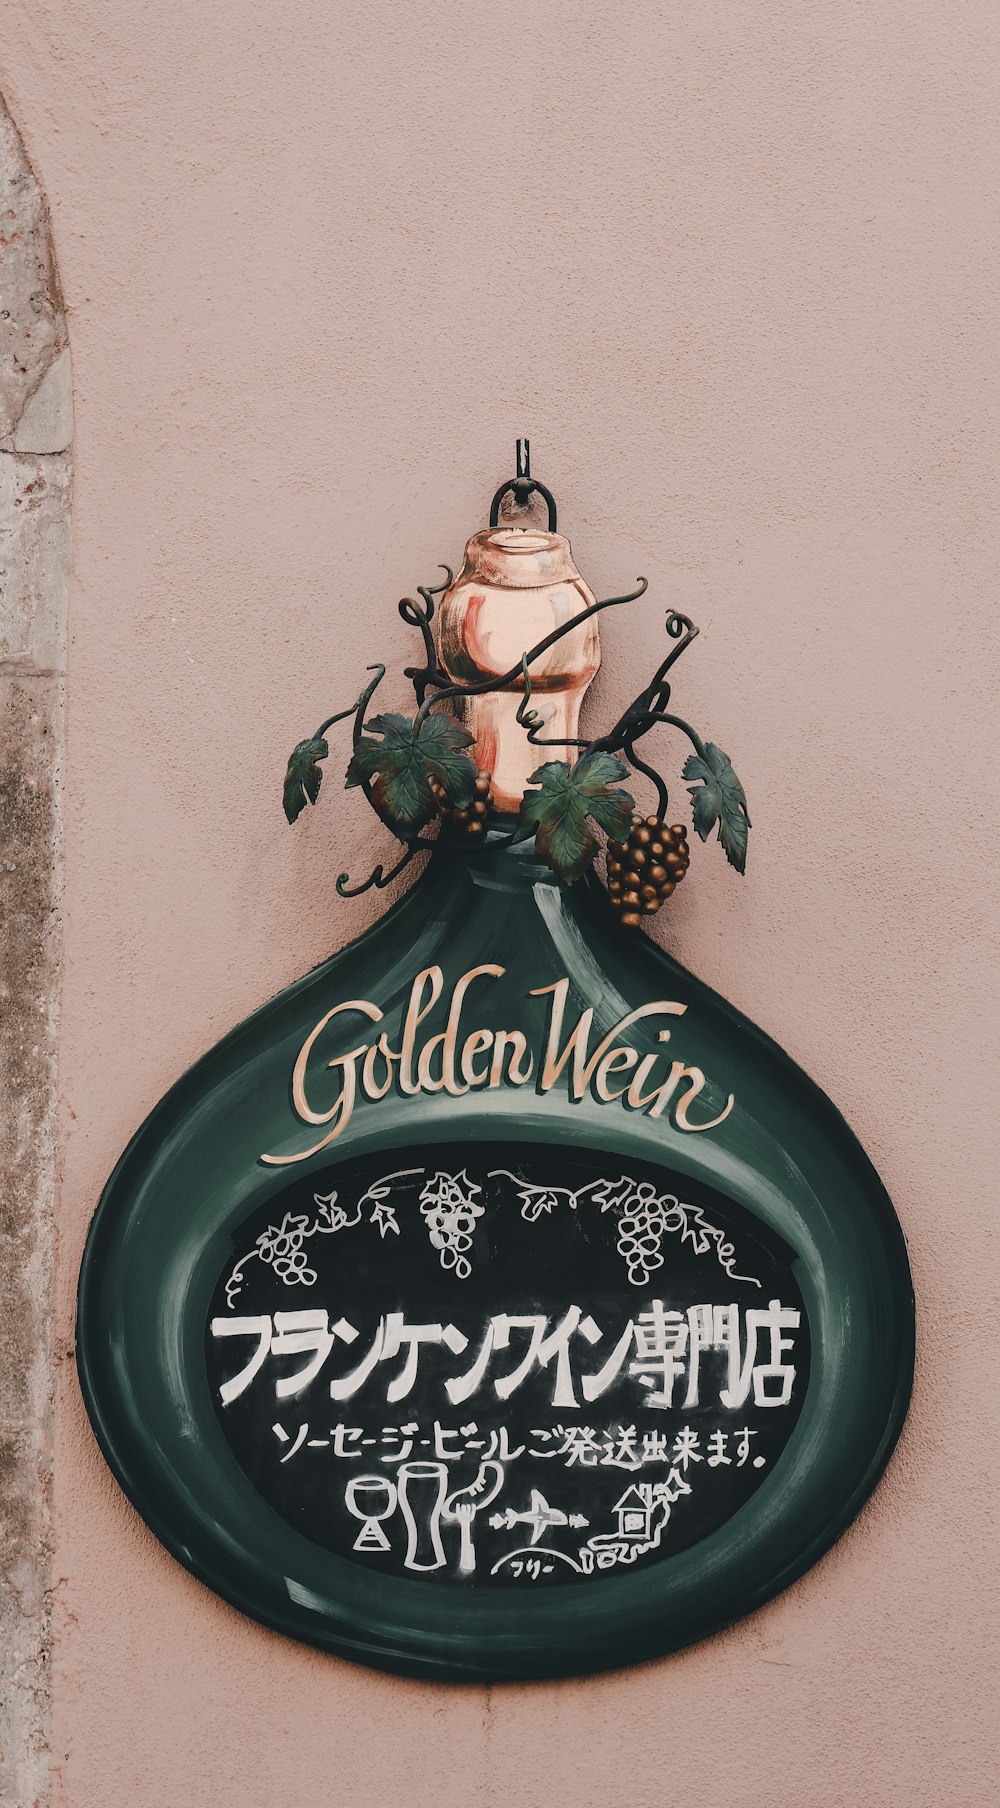 a sign on the side of a building that says golden war